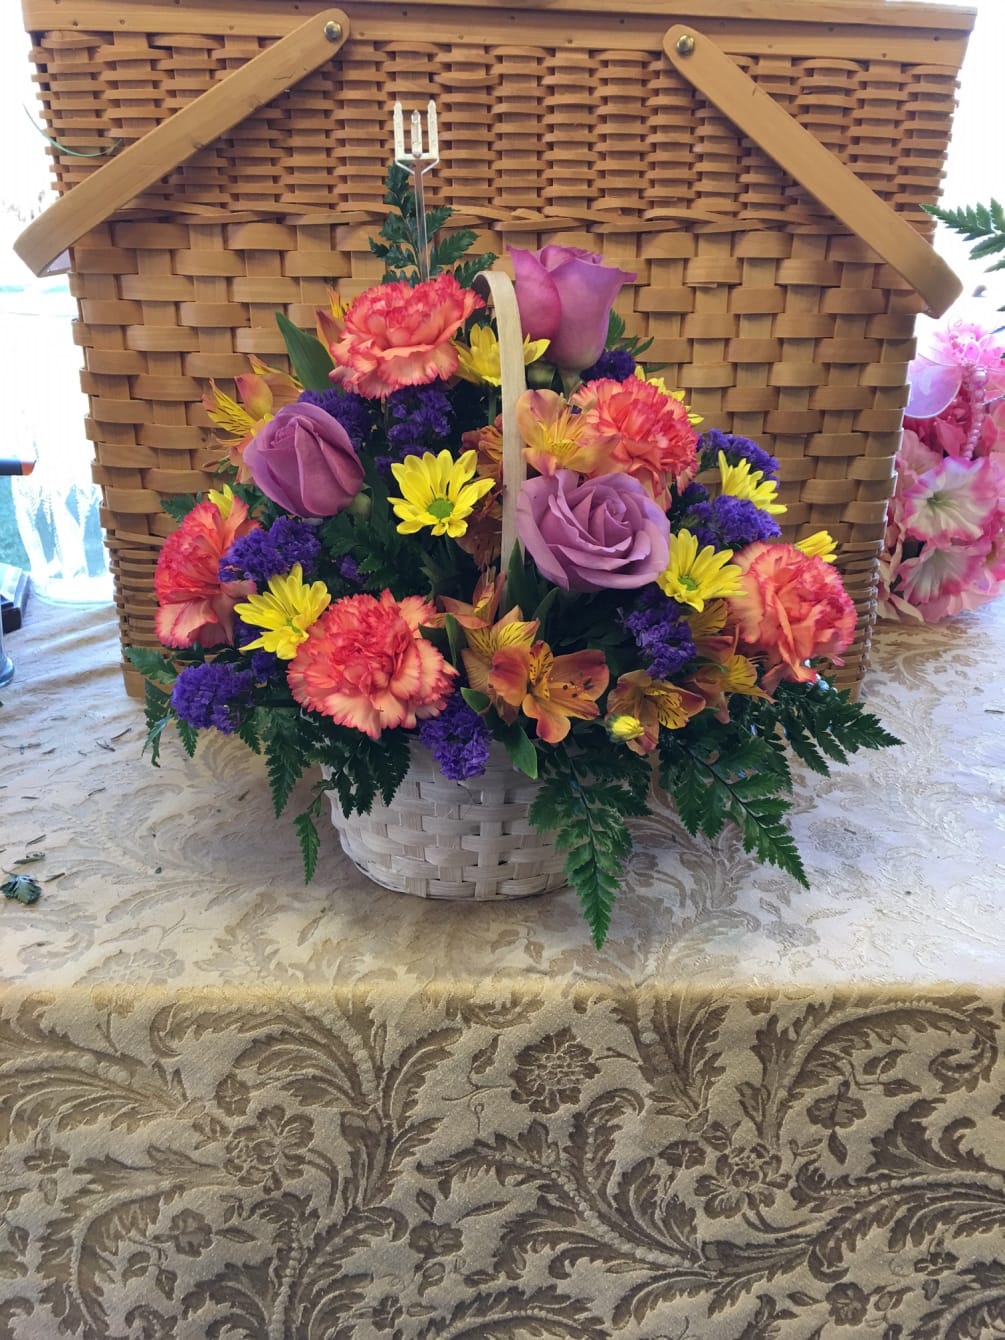 Sending cheer is easy with our bright colorful basket of blooms. Roses